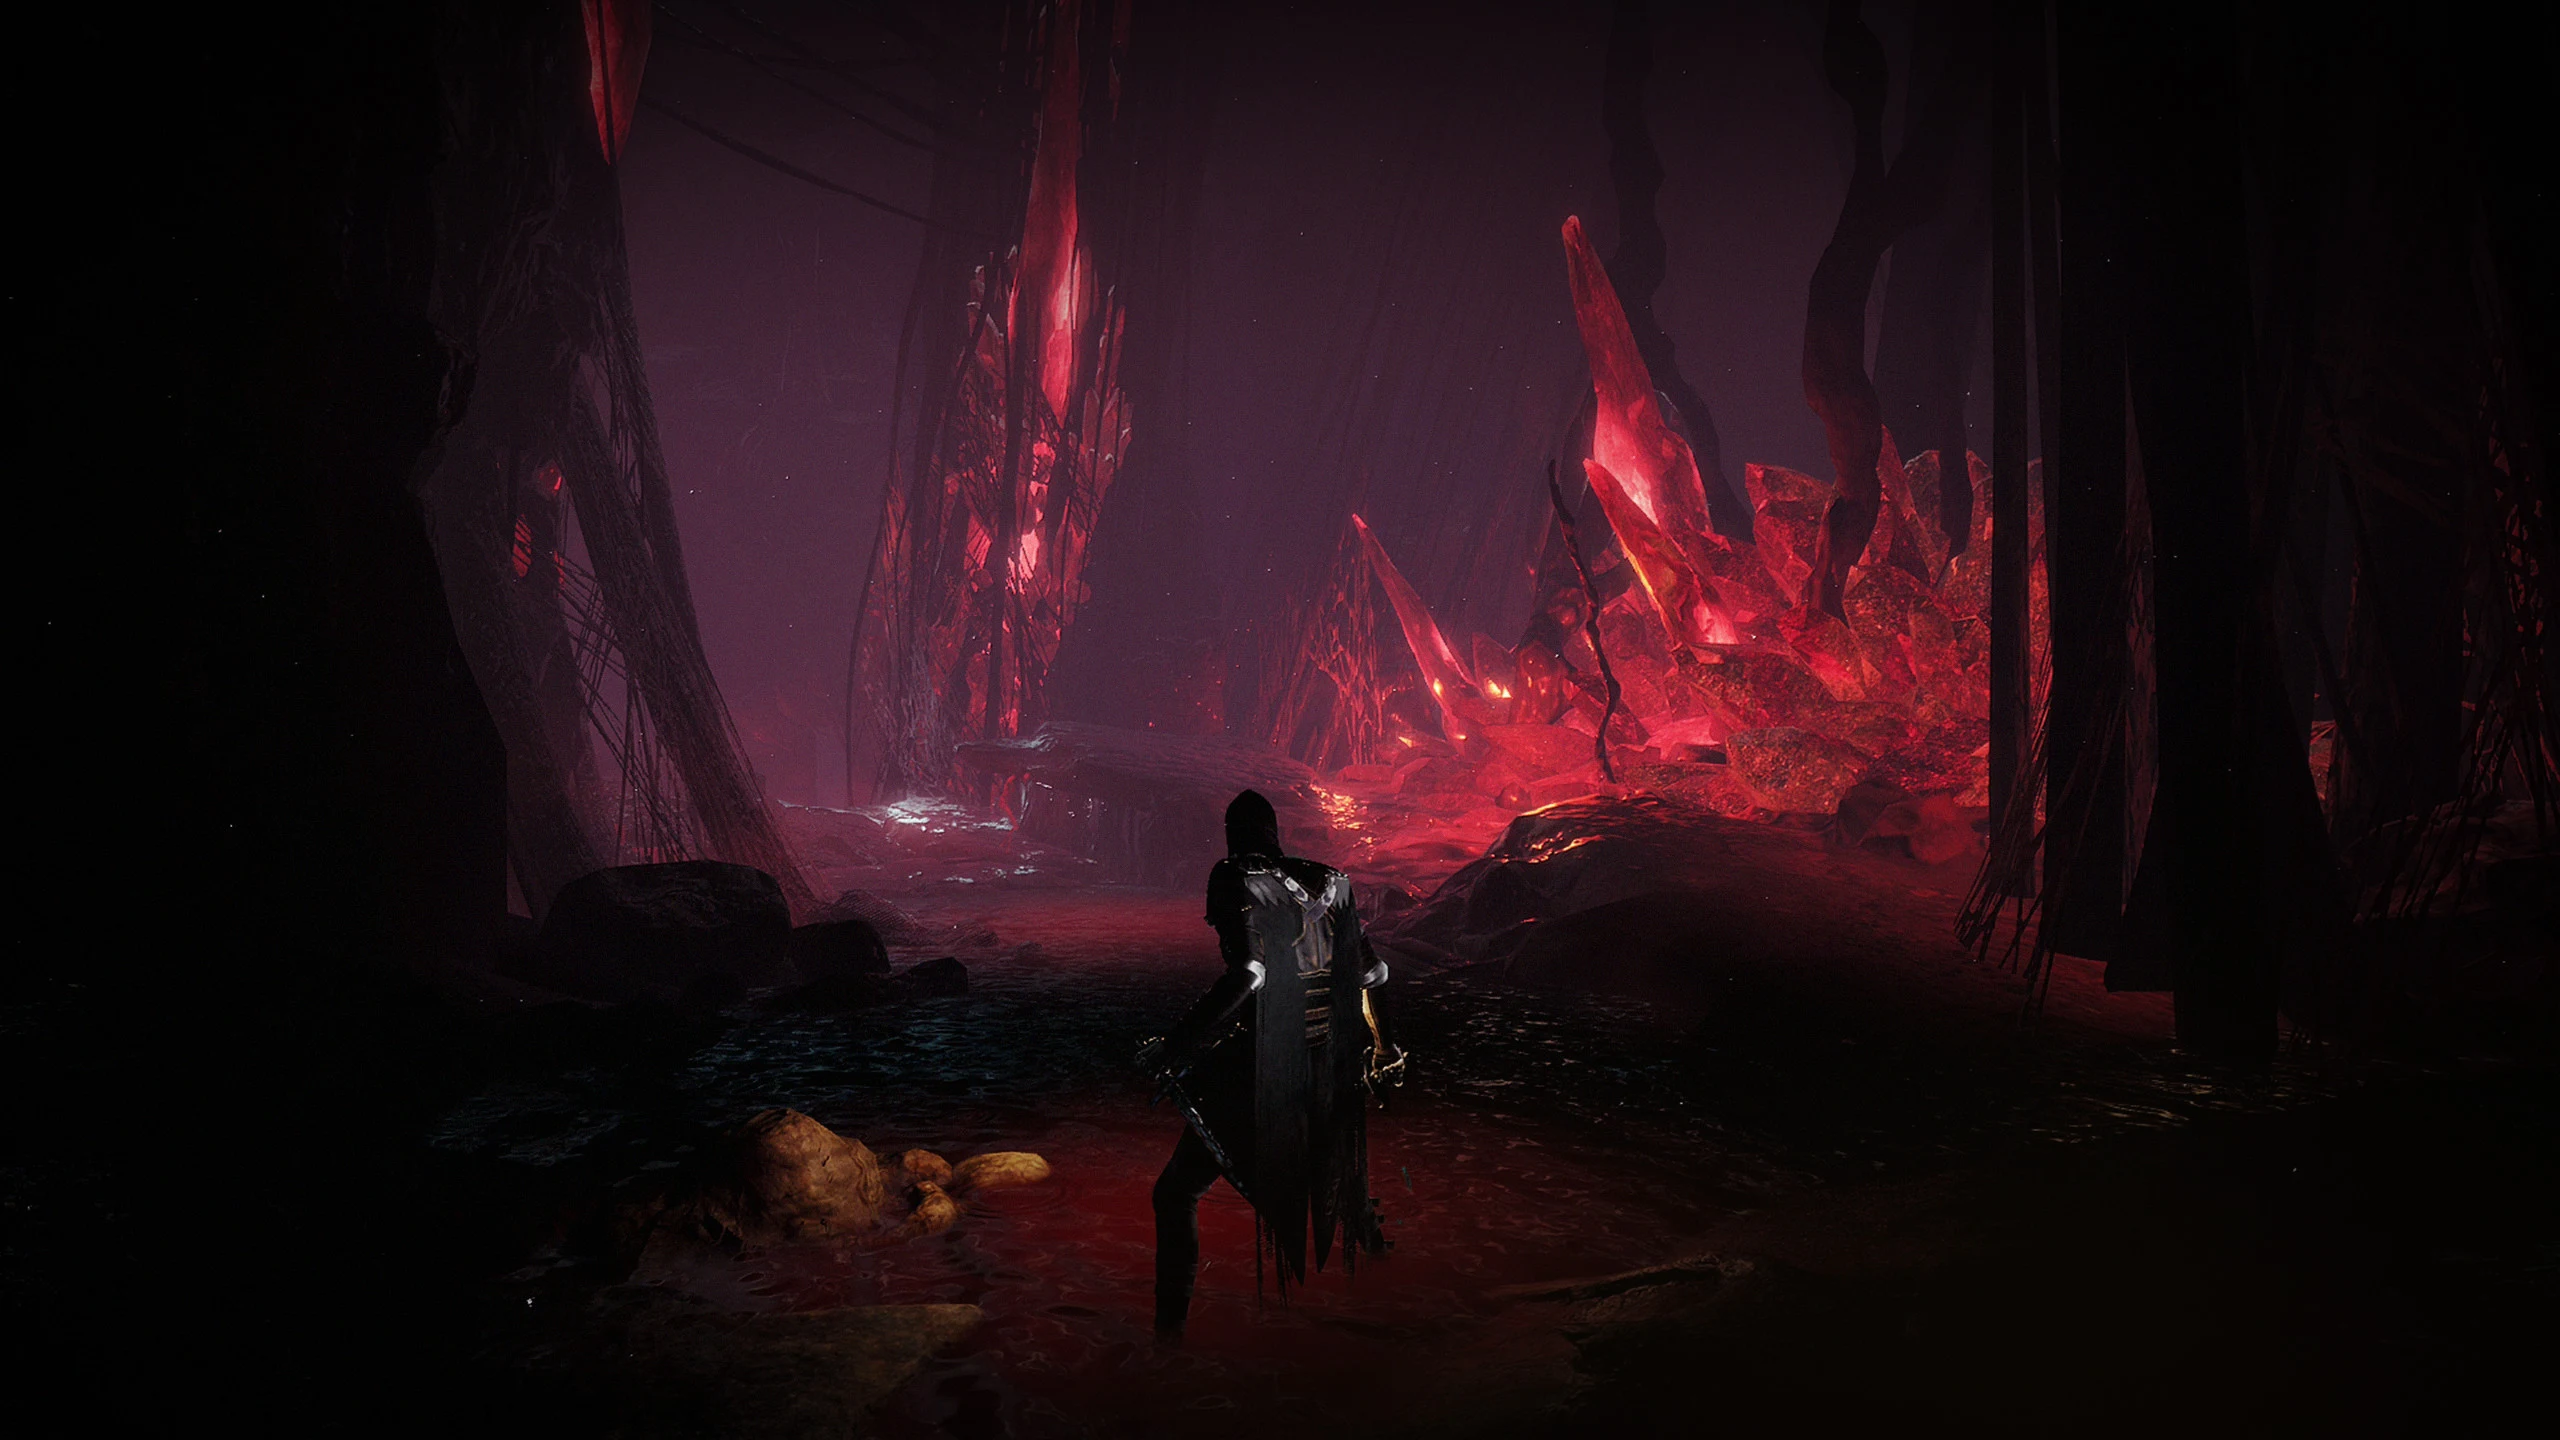 Entering the lair of the Hanged Queen